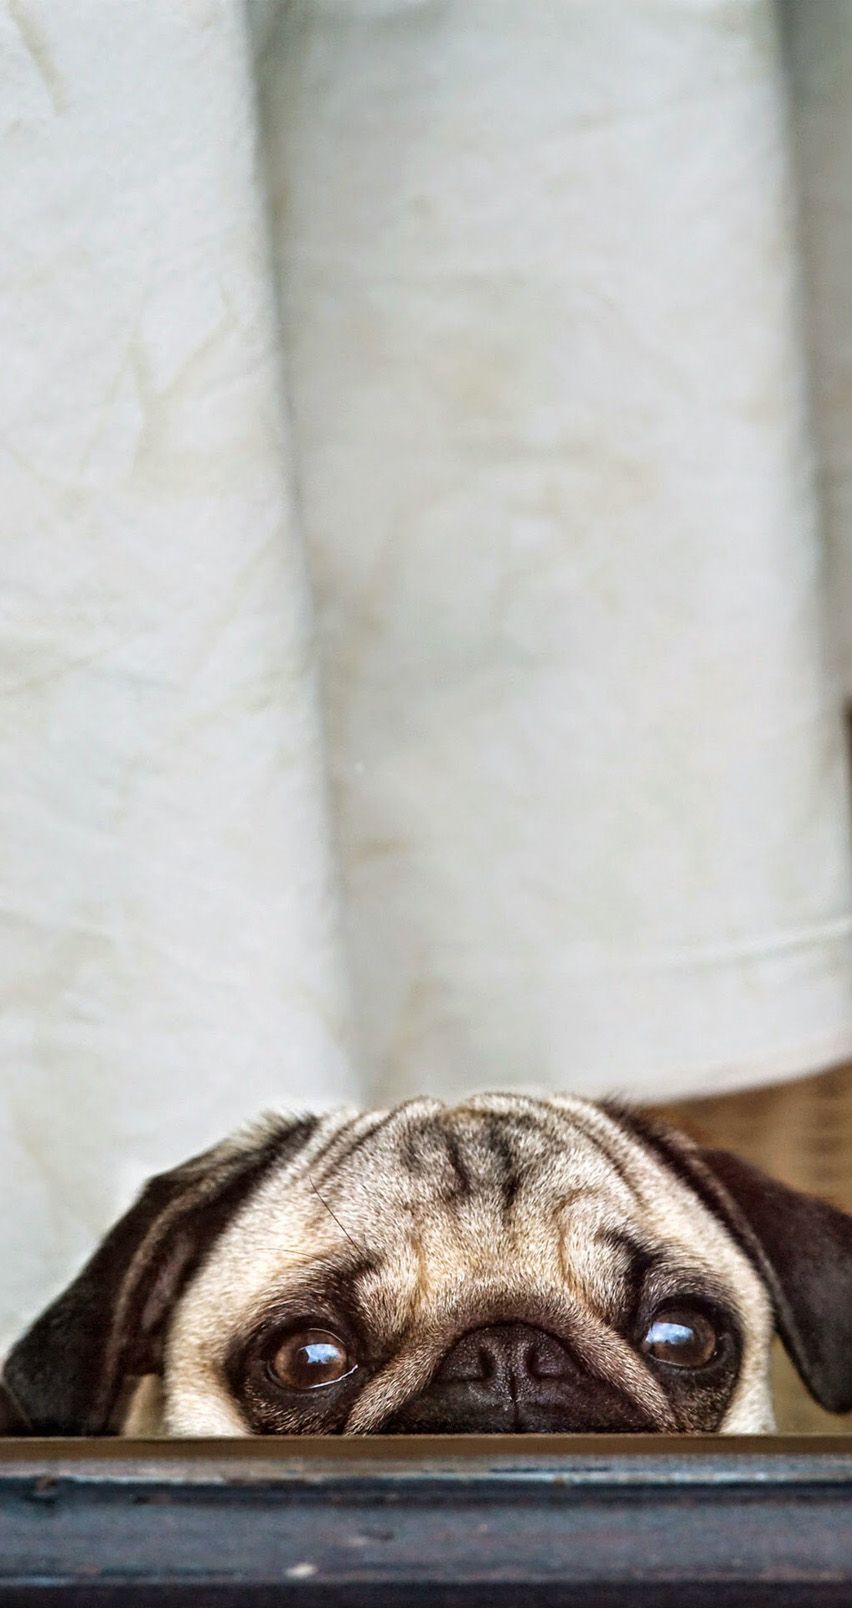 Cute Pug Iphone Wallpapers Wallpapers